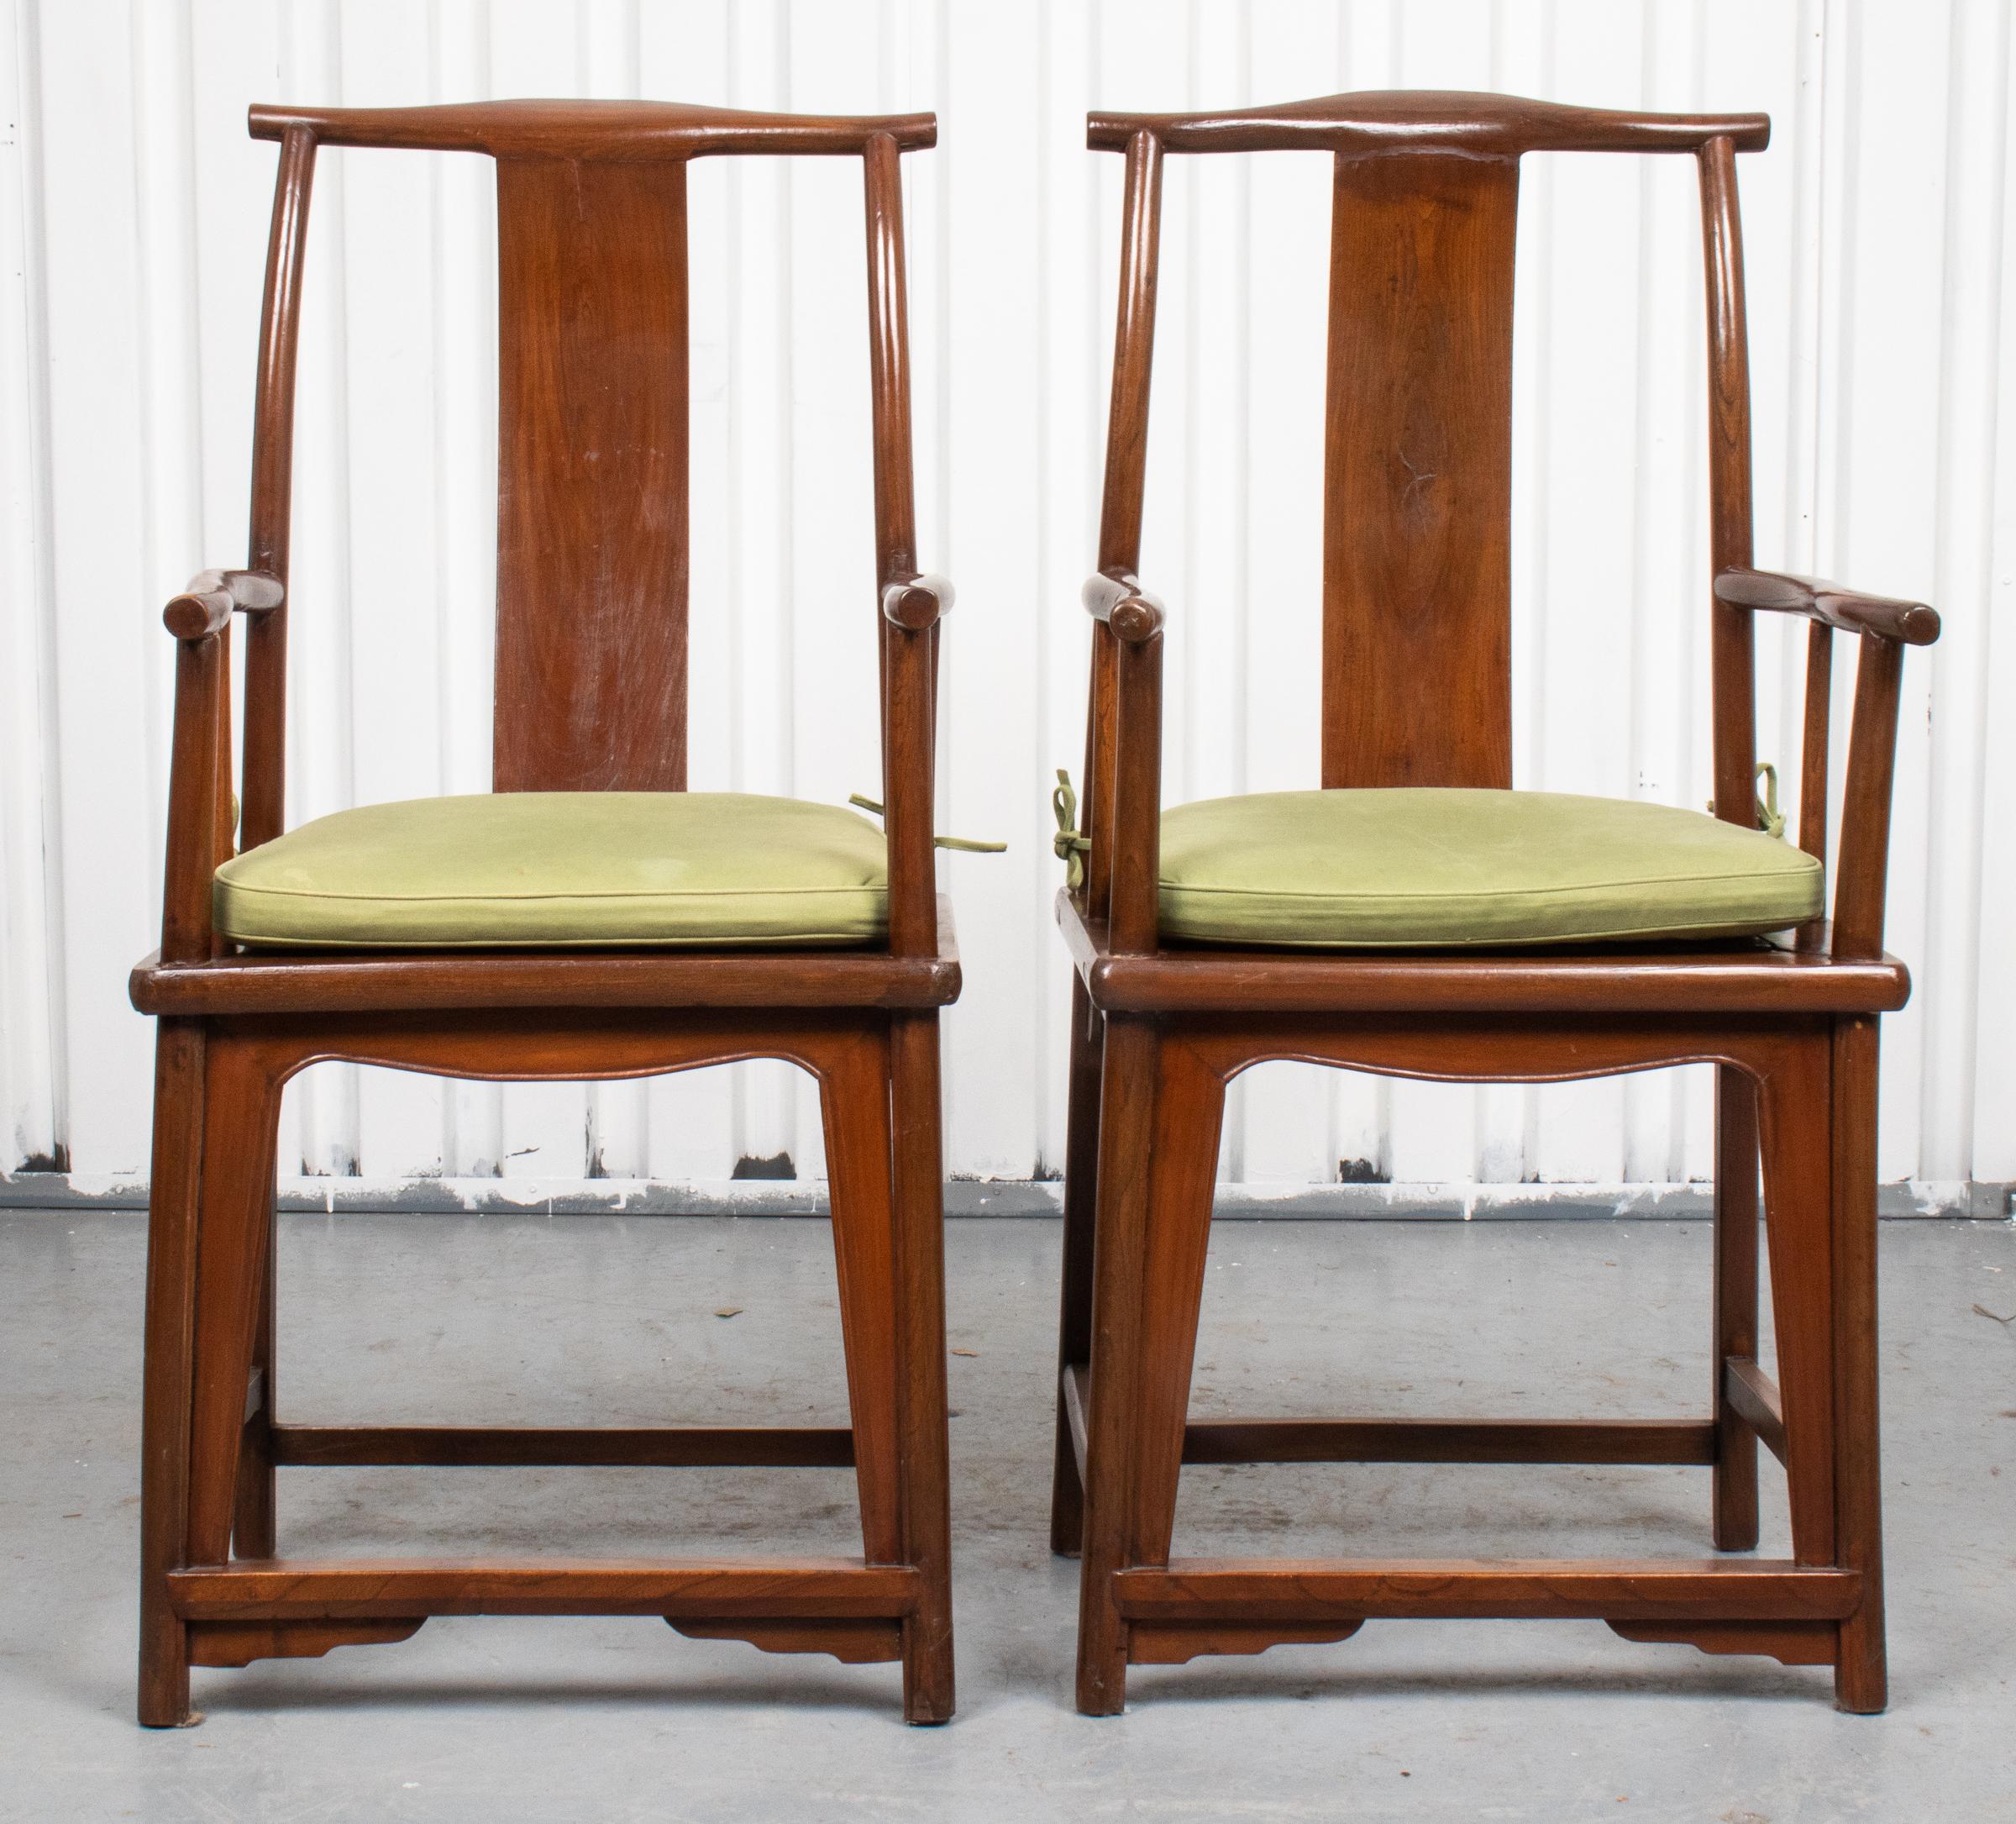 Pair of Chinese hardwood yoke back scholar's chairs, the frames with gently canted crest rail and arms around simple yokes and plain inset seats. Measures: 42.5” H x 20” W x 19” D.